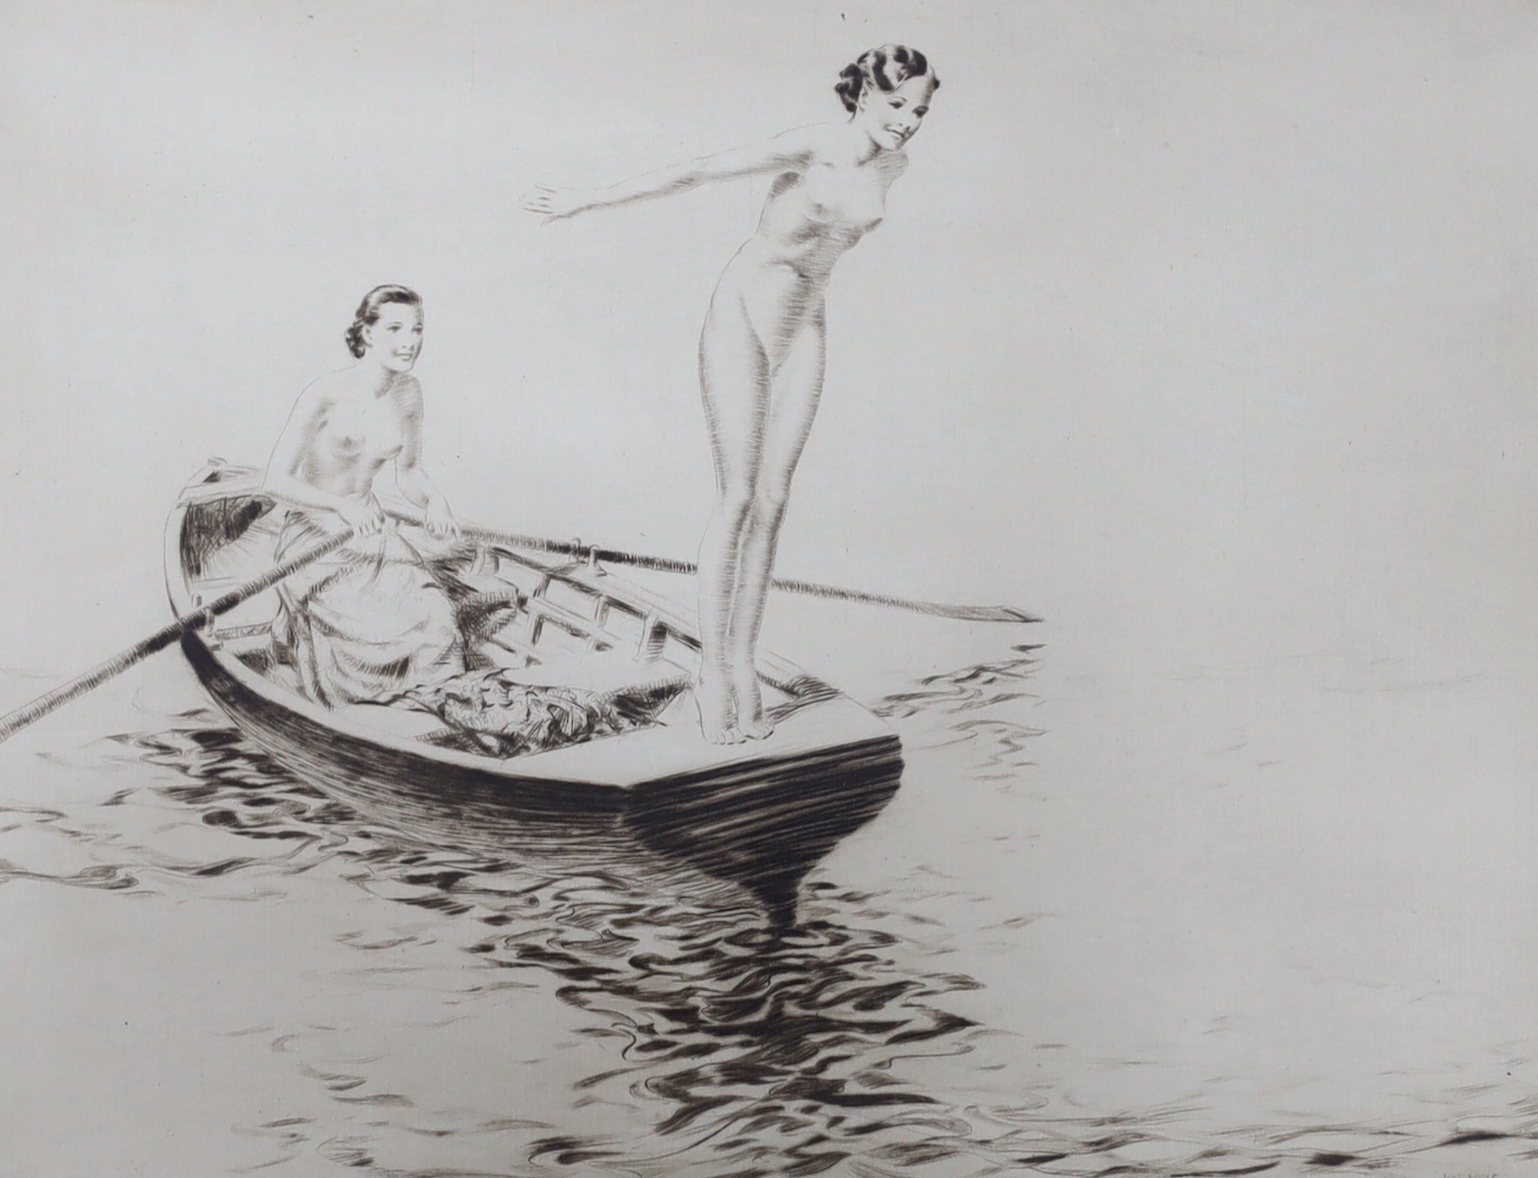 Nat Long (1893-1955), etching, 'The bathers', pencil signed and limited edition, 6/75, 21 x 27cm